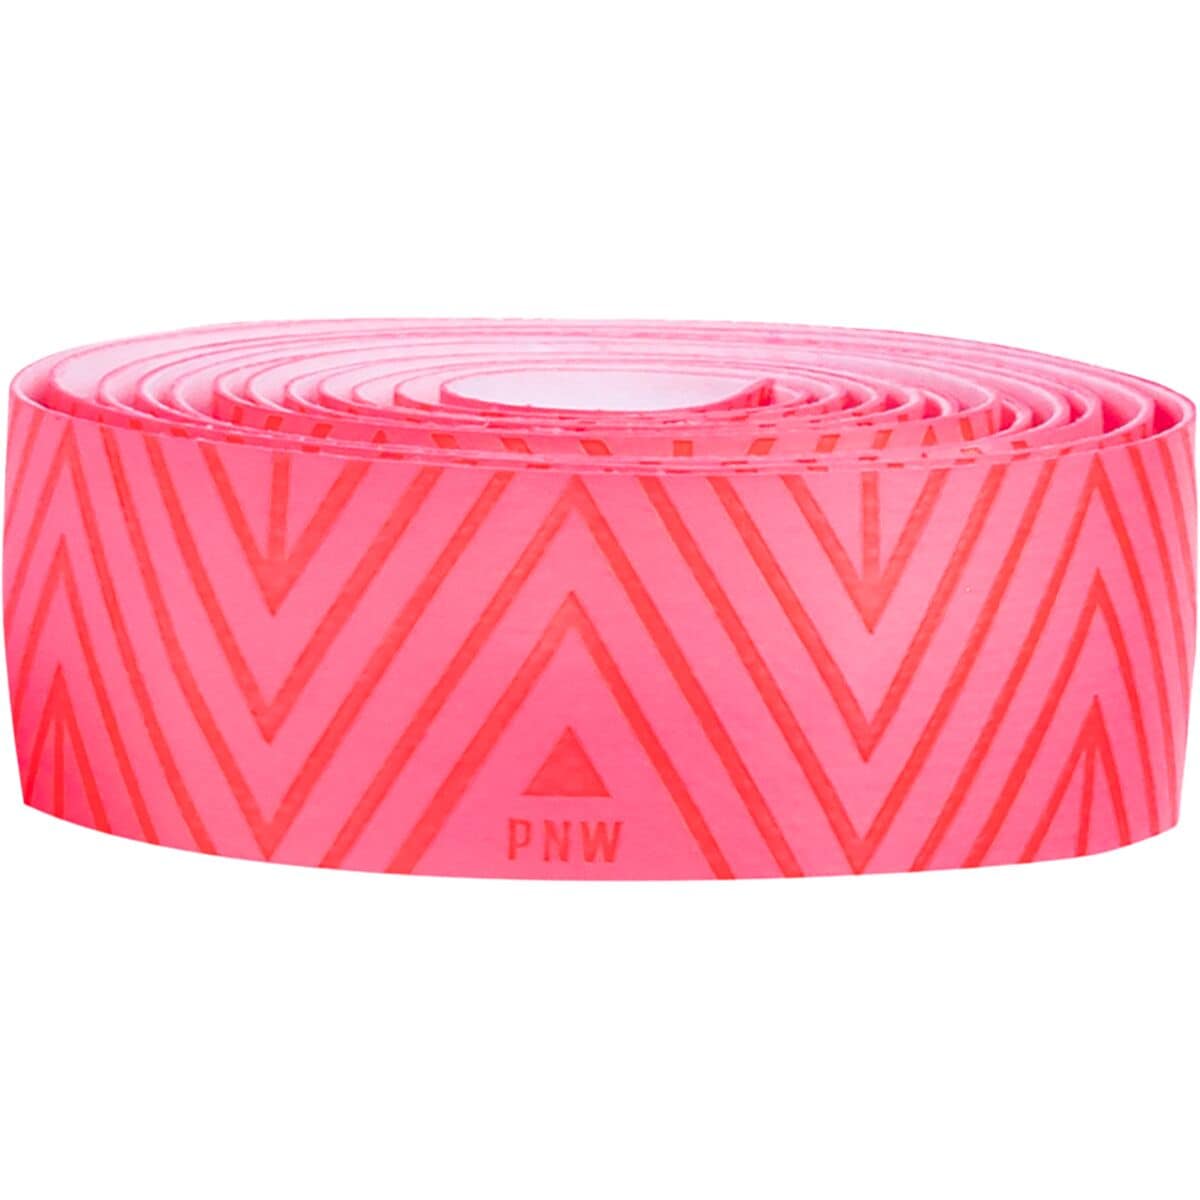 PNW Components Coast Bar Tape Carwash Pink, One Size